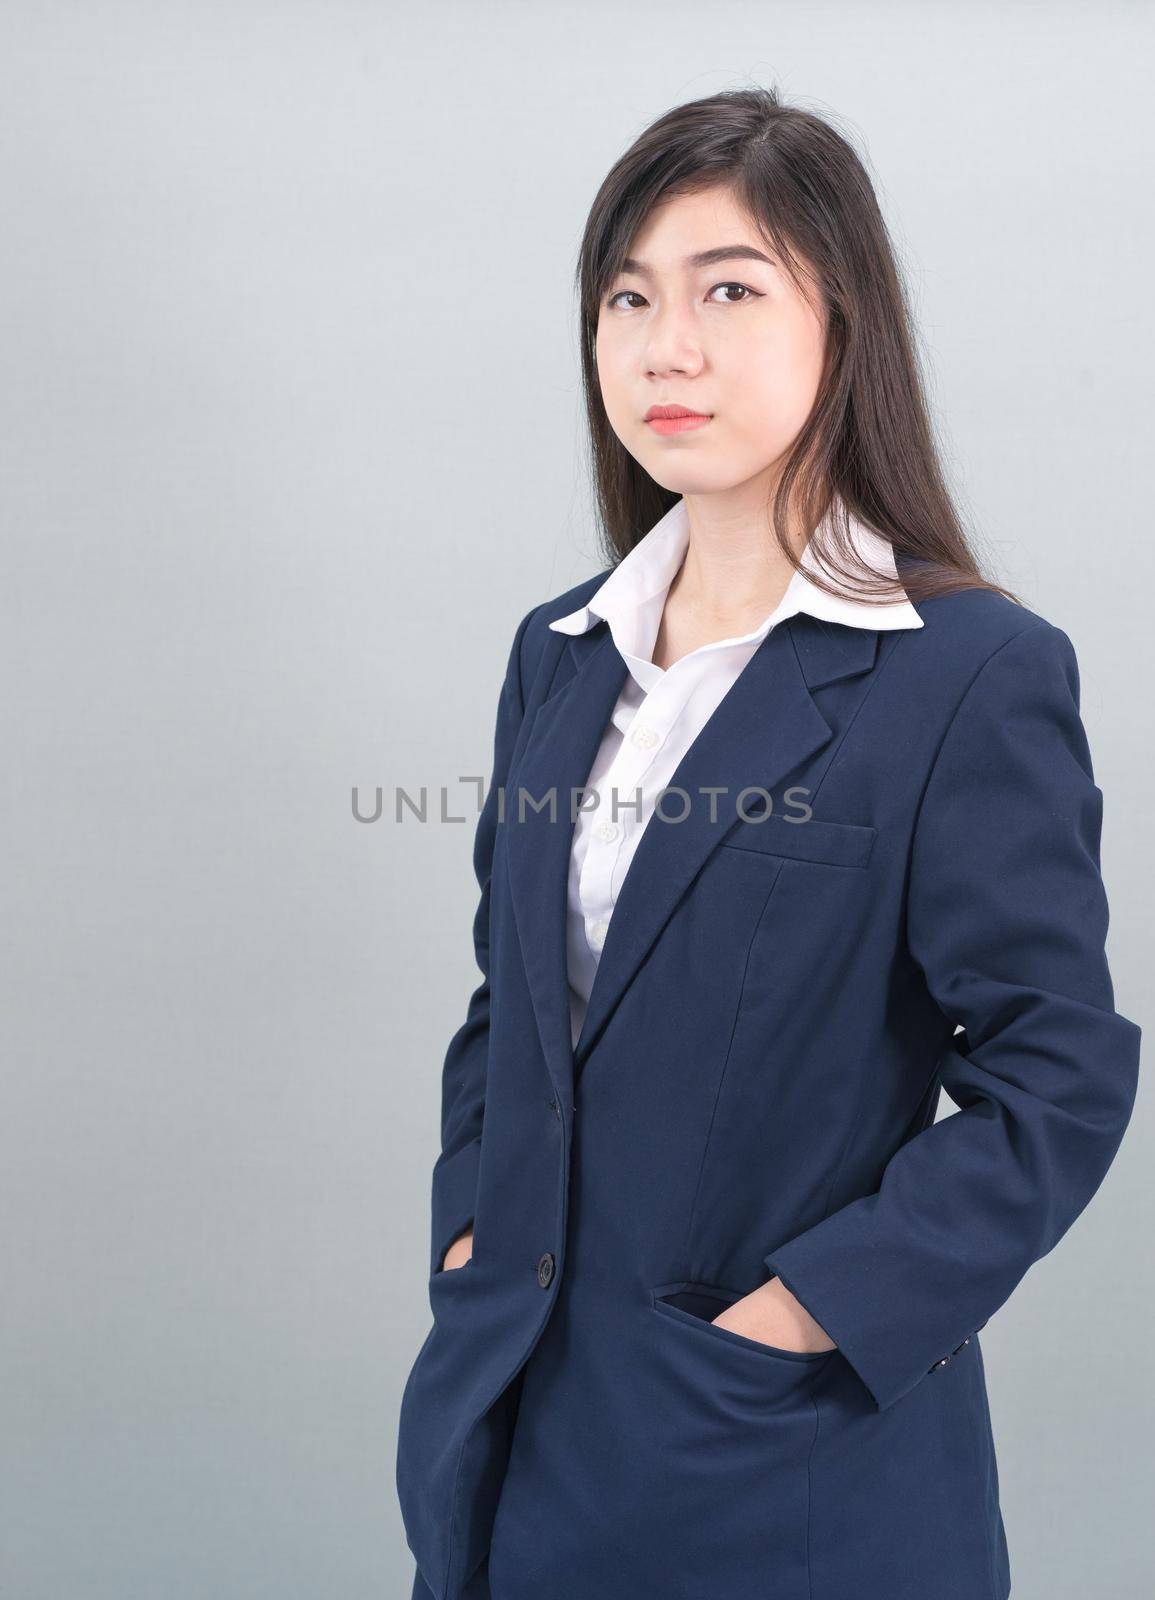 Portrait of asian business woman standing isolated on gray background